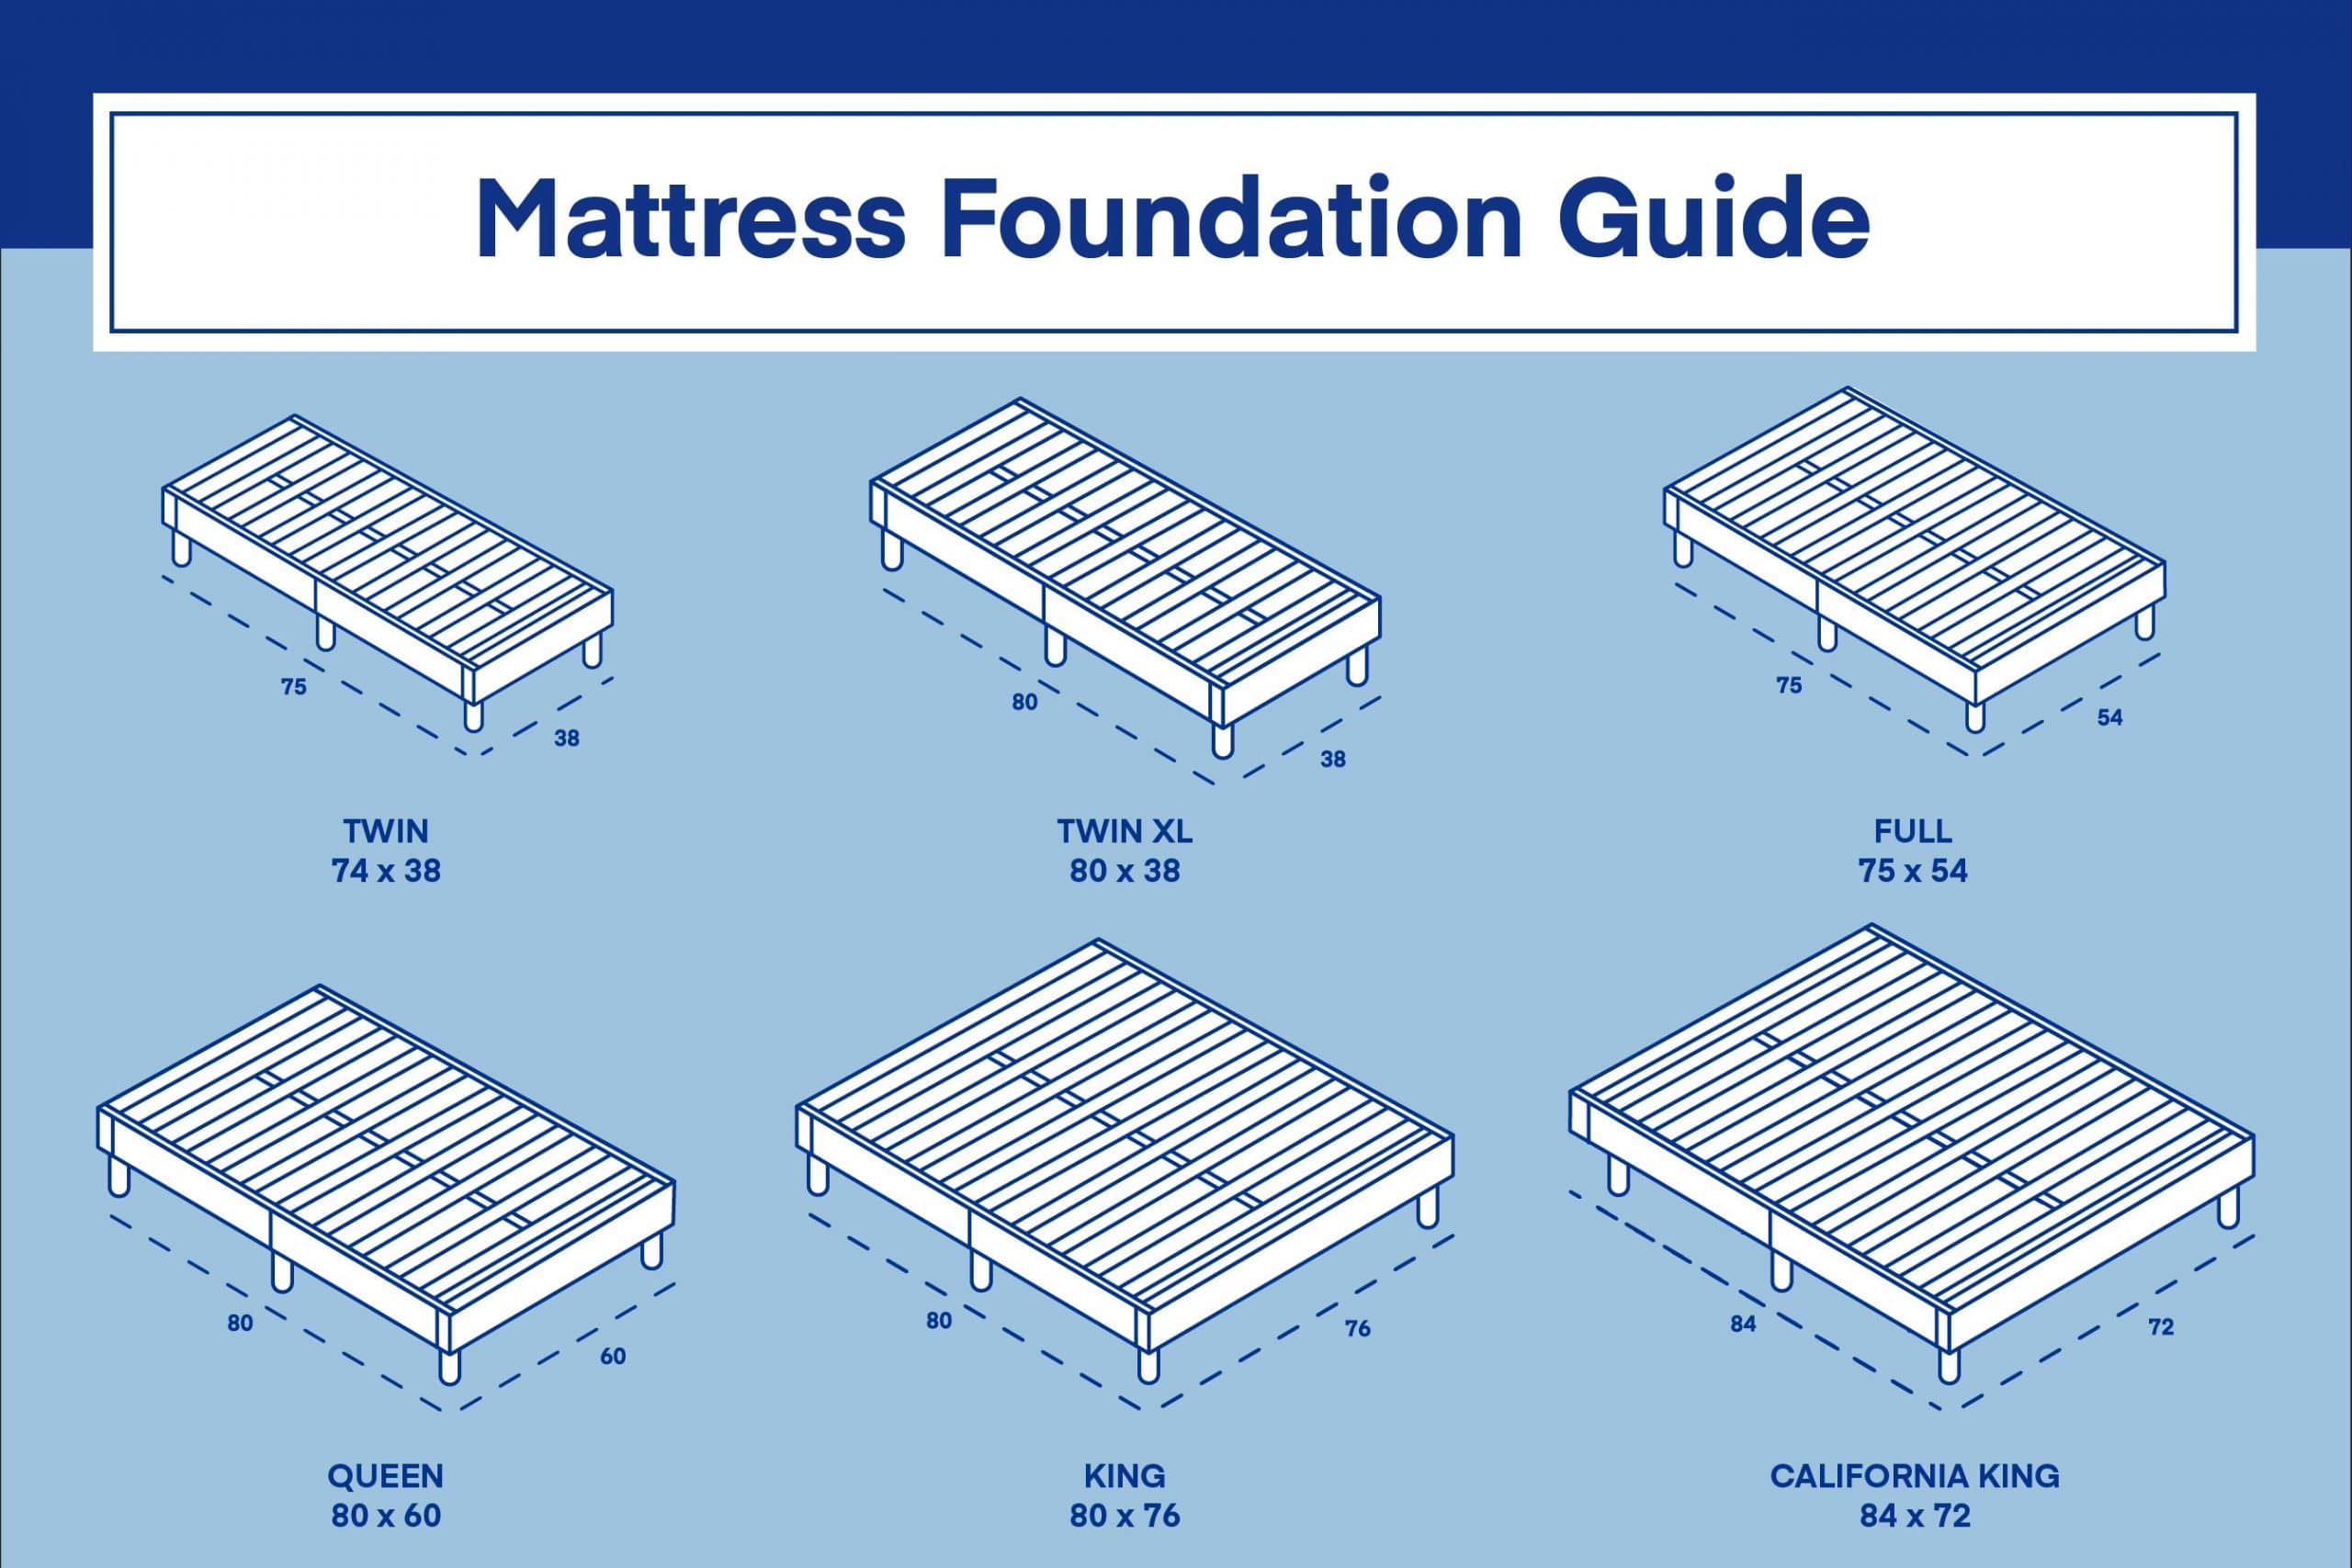 What Size Box Spring Do You Need For A King Mattress?